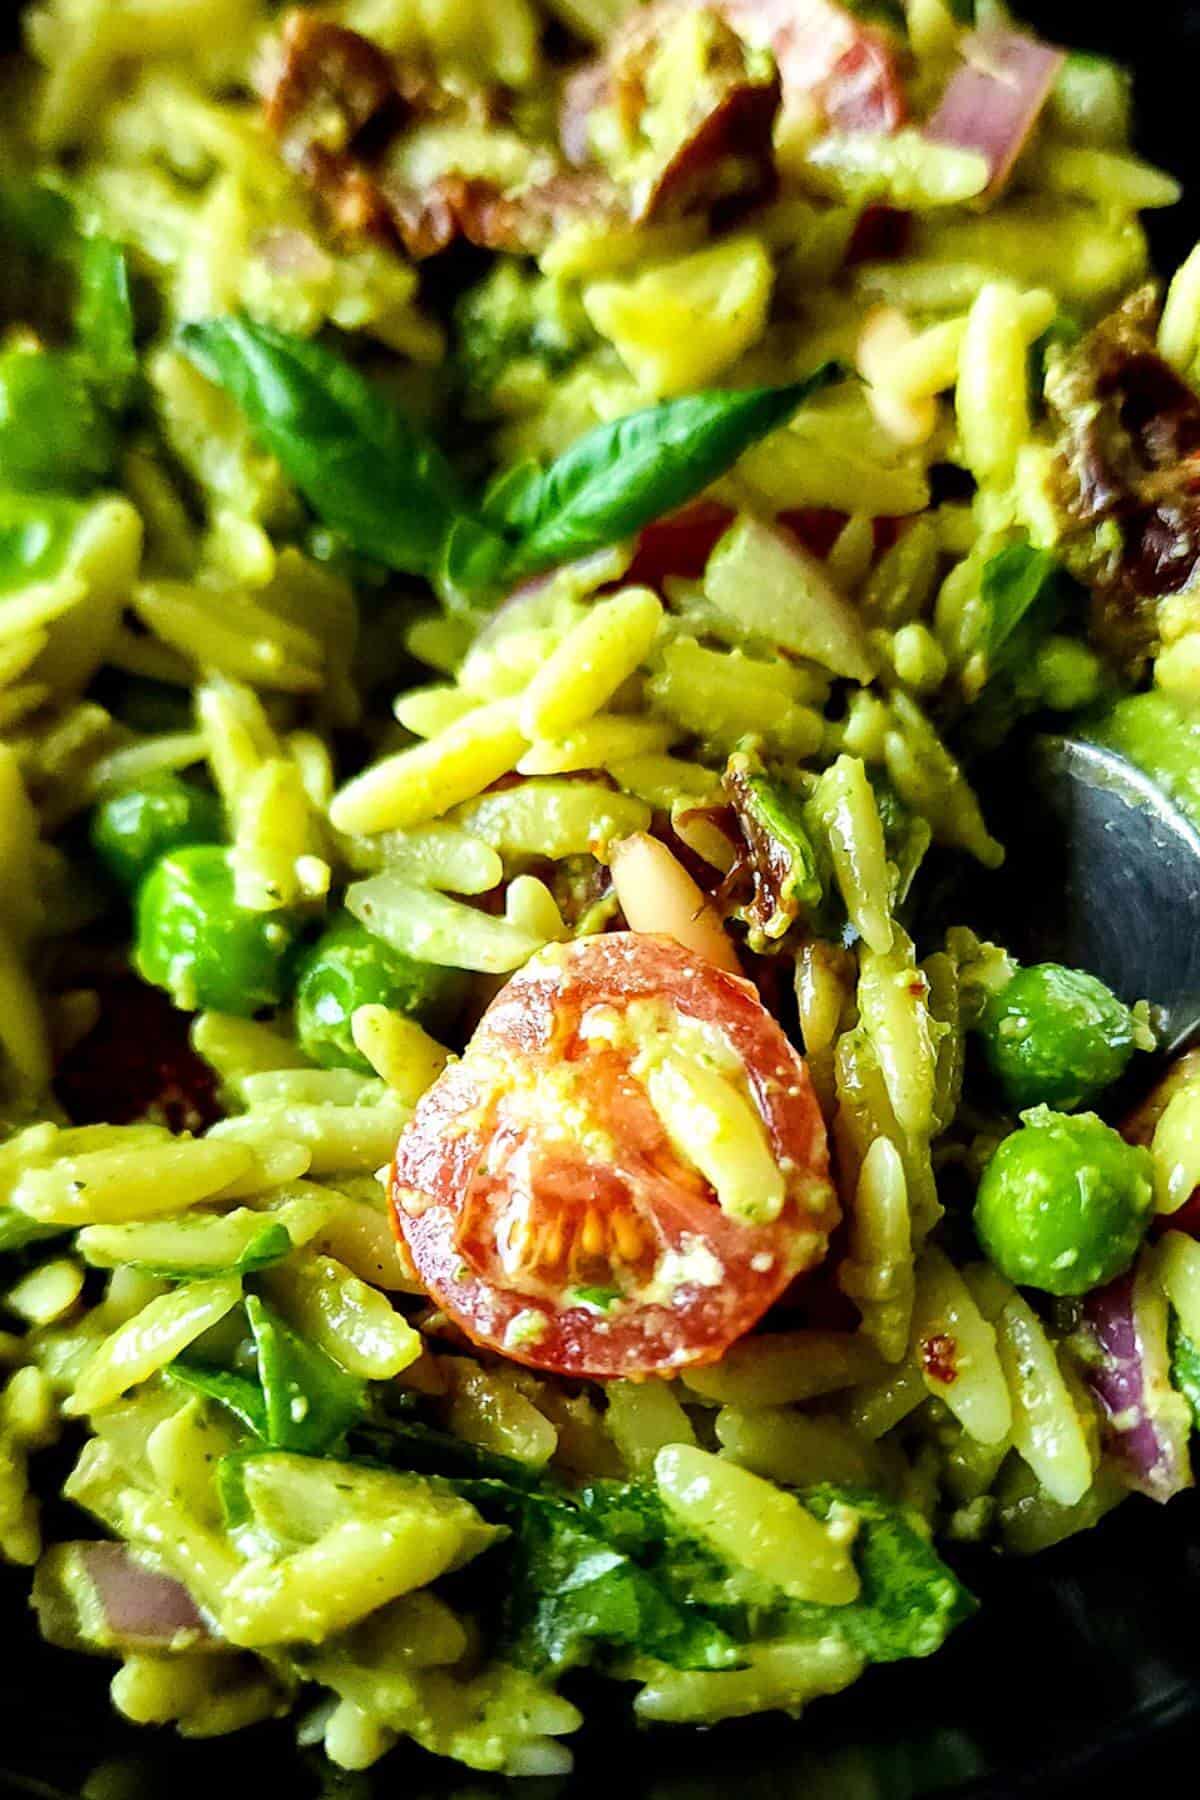 Orzo salad with pesto, cherry tomatoes, and green peas in a bowl.